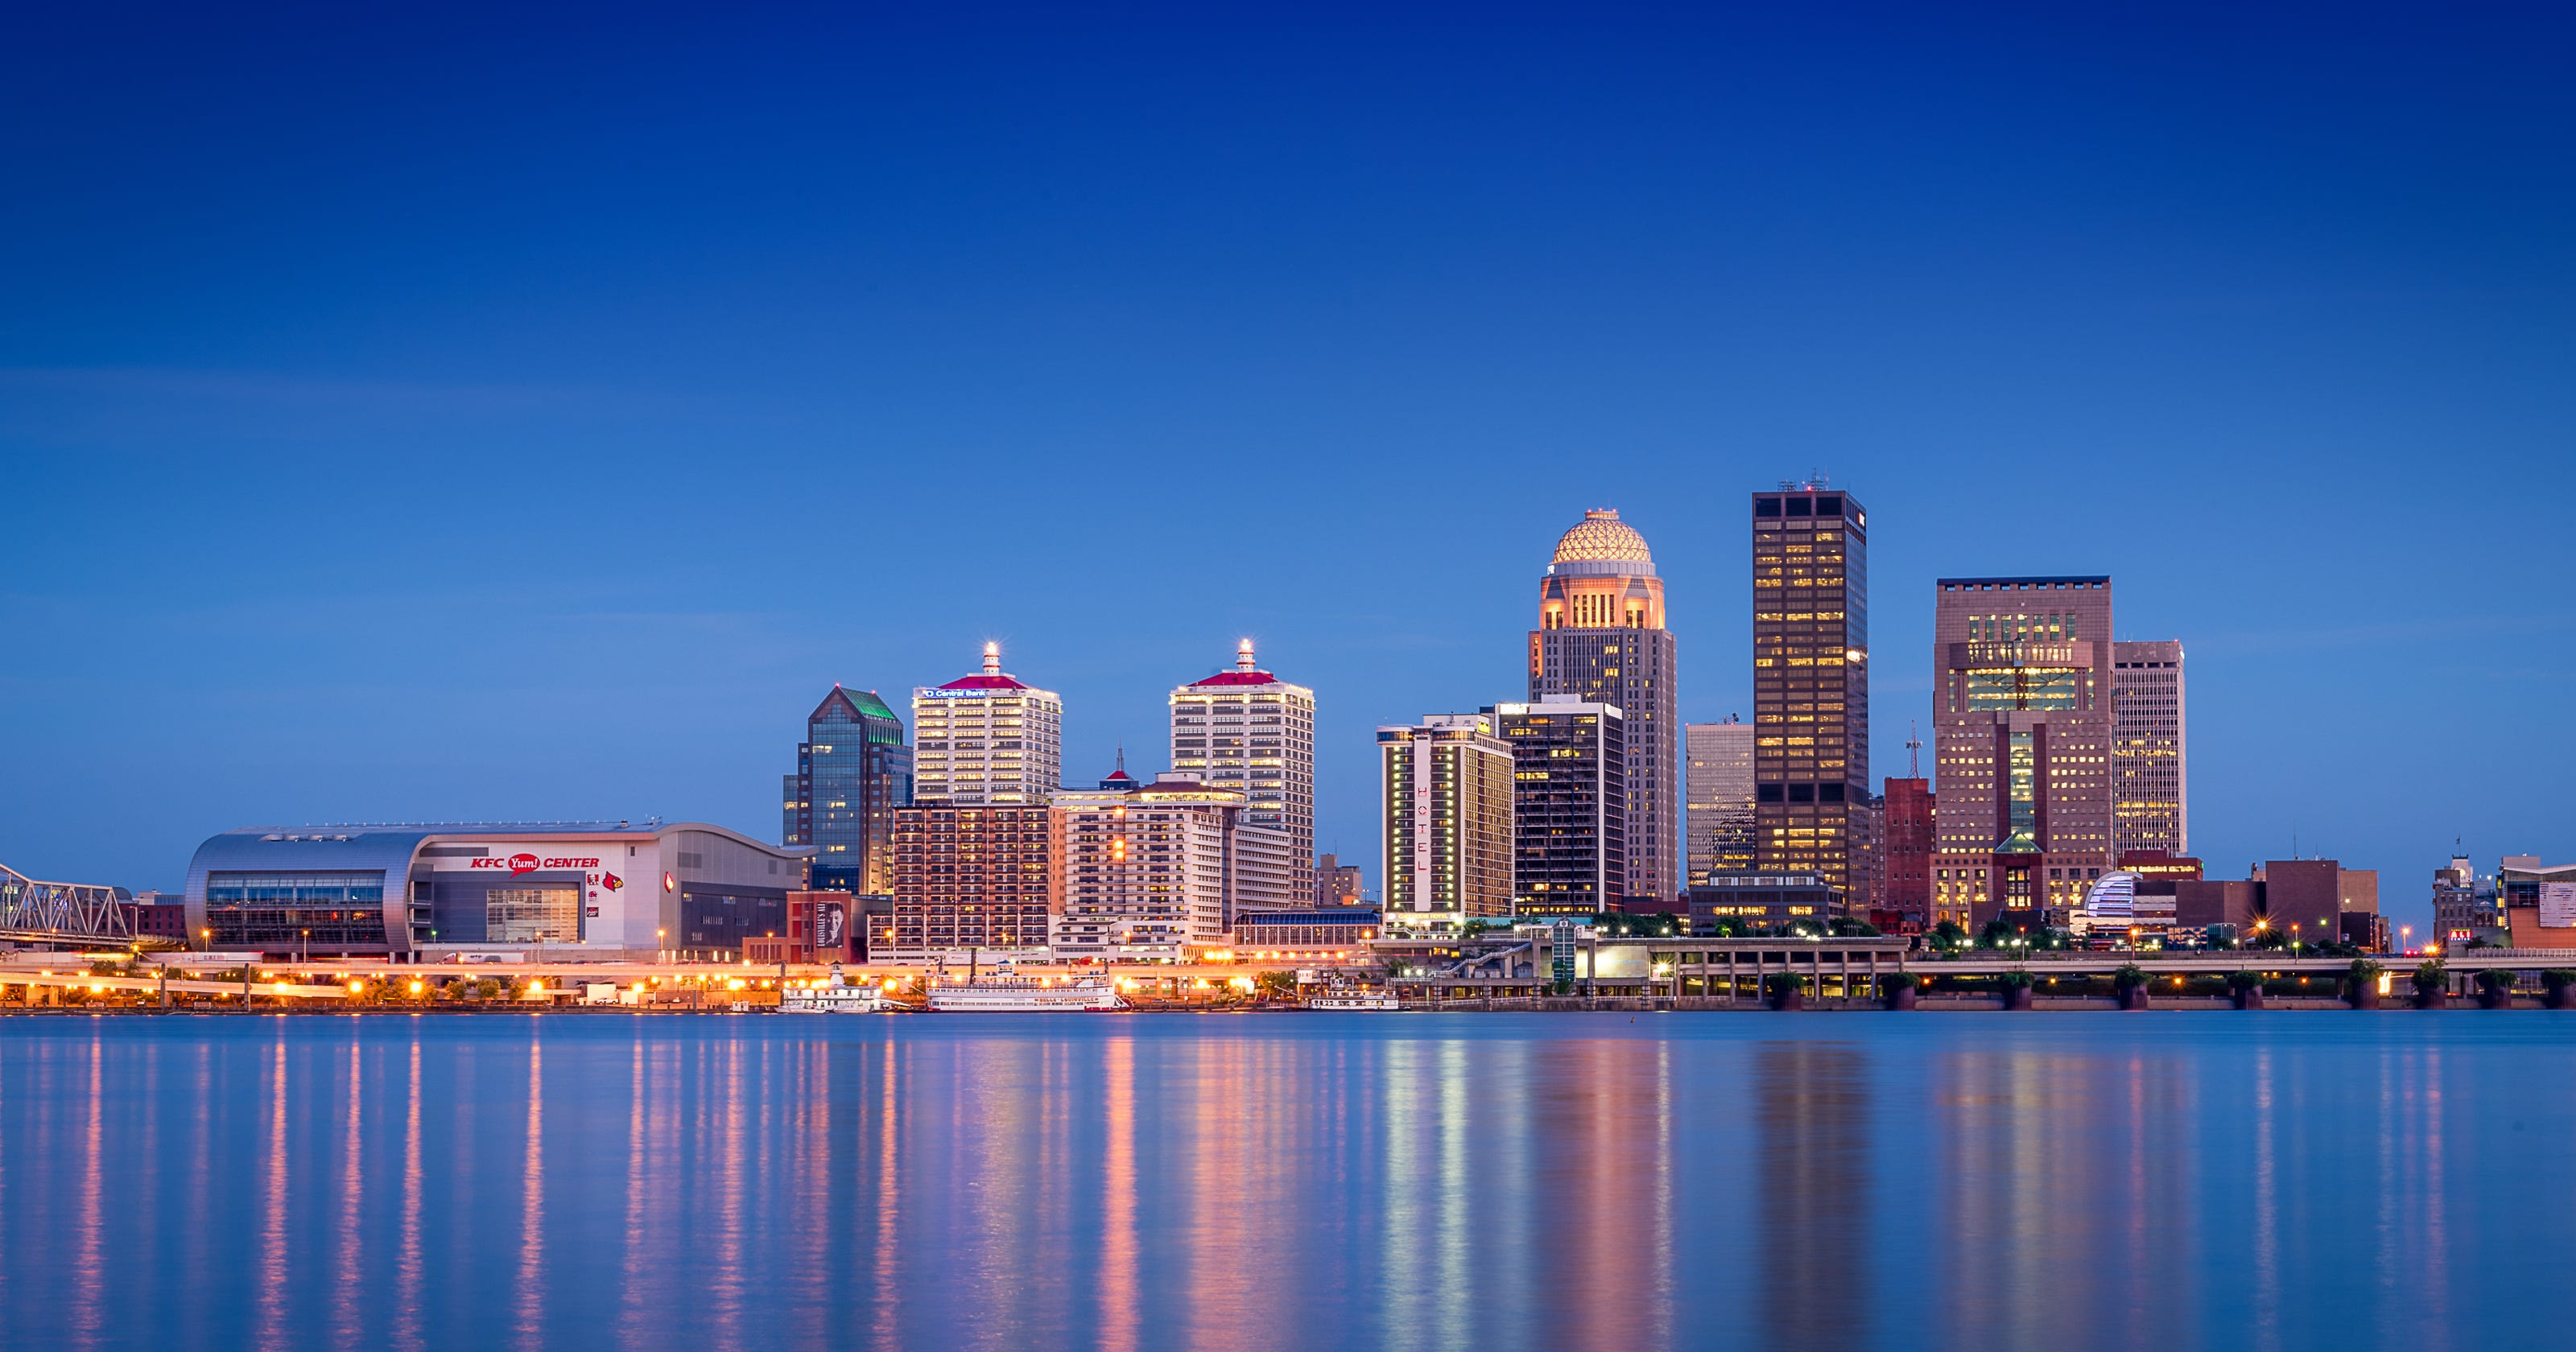 Louisville is one of the top cities Americans mispronounce